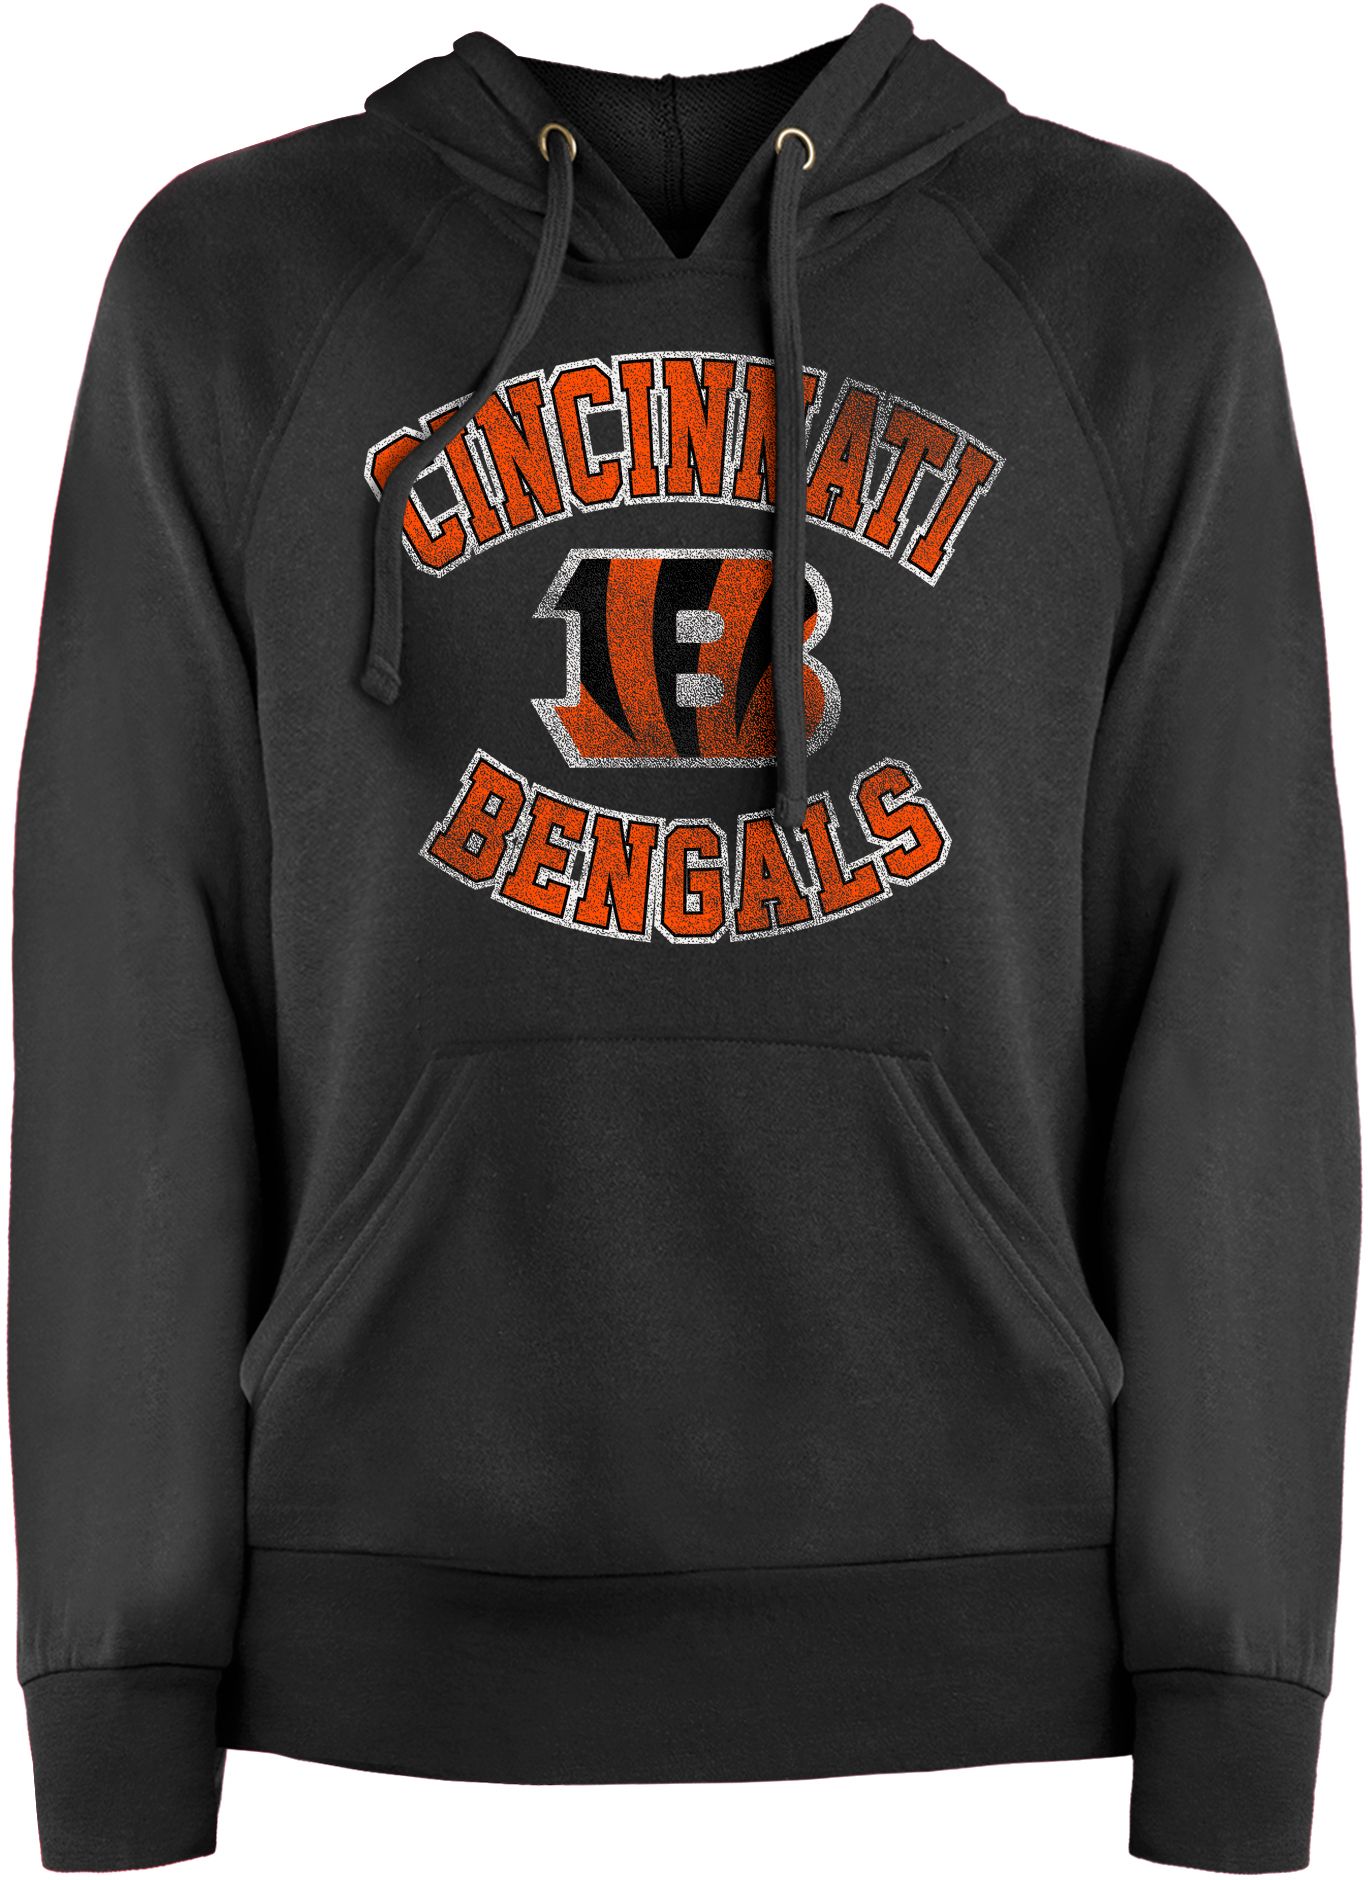 where to buy bengals jerseys near me